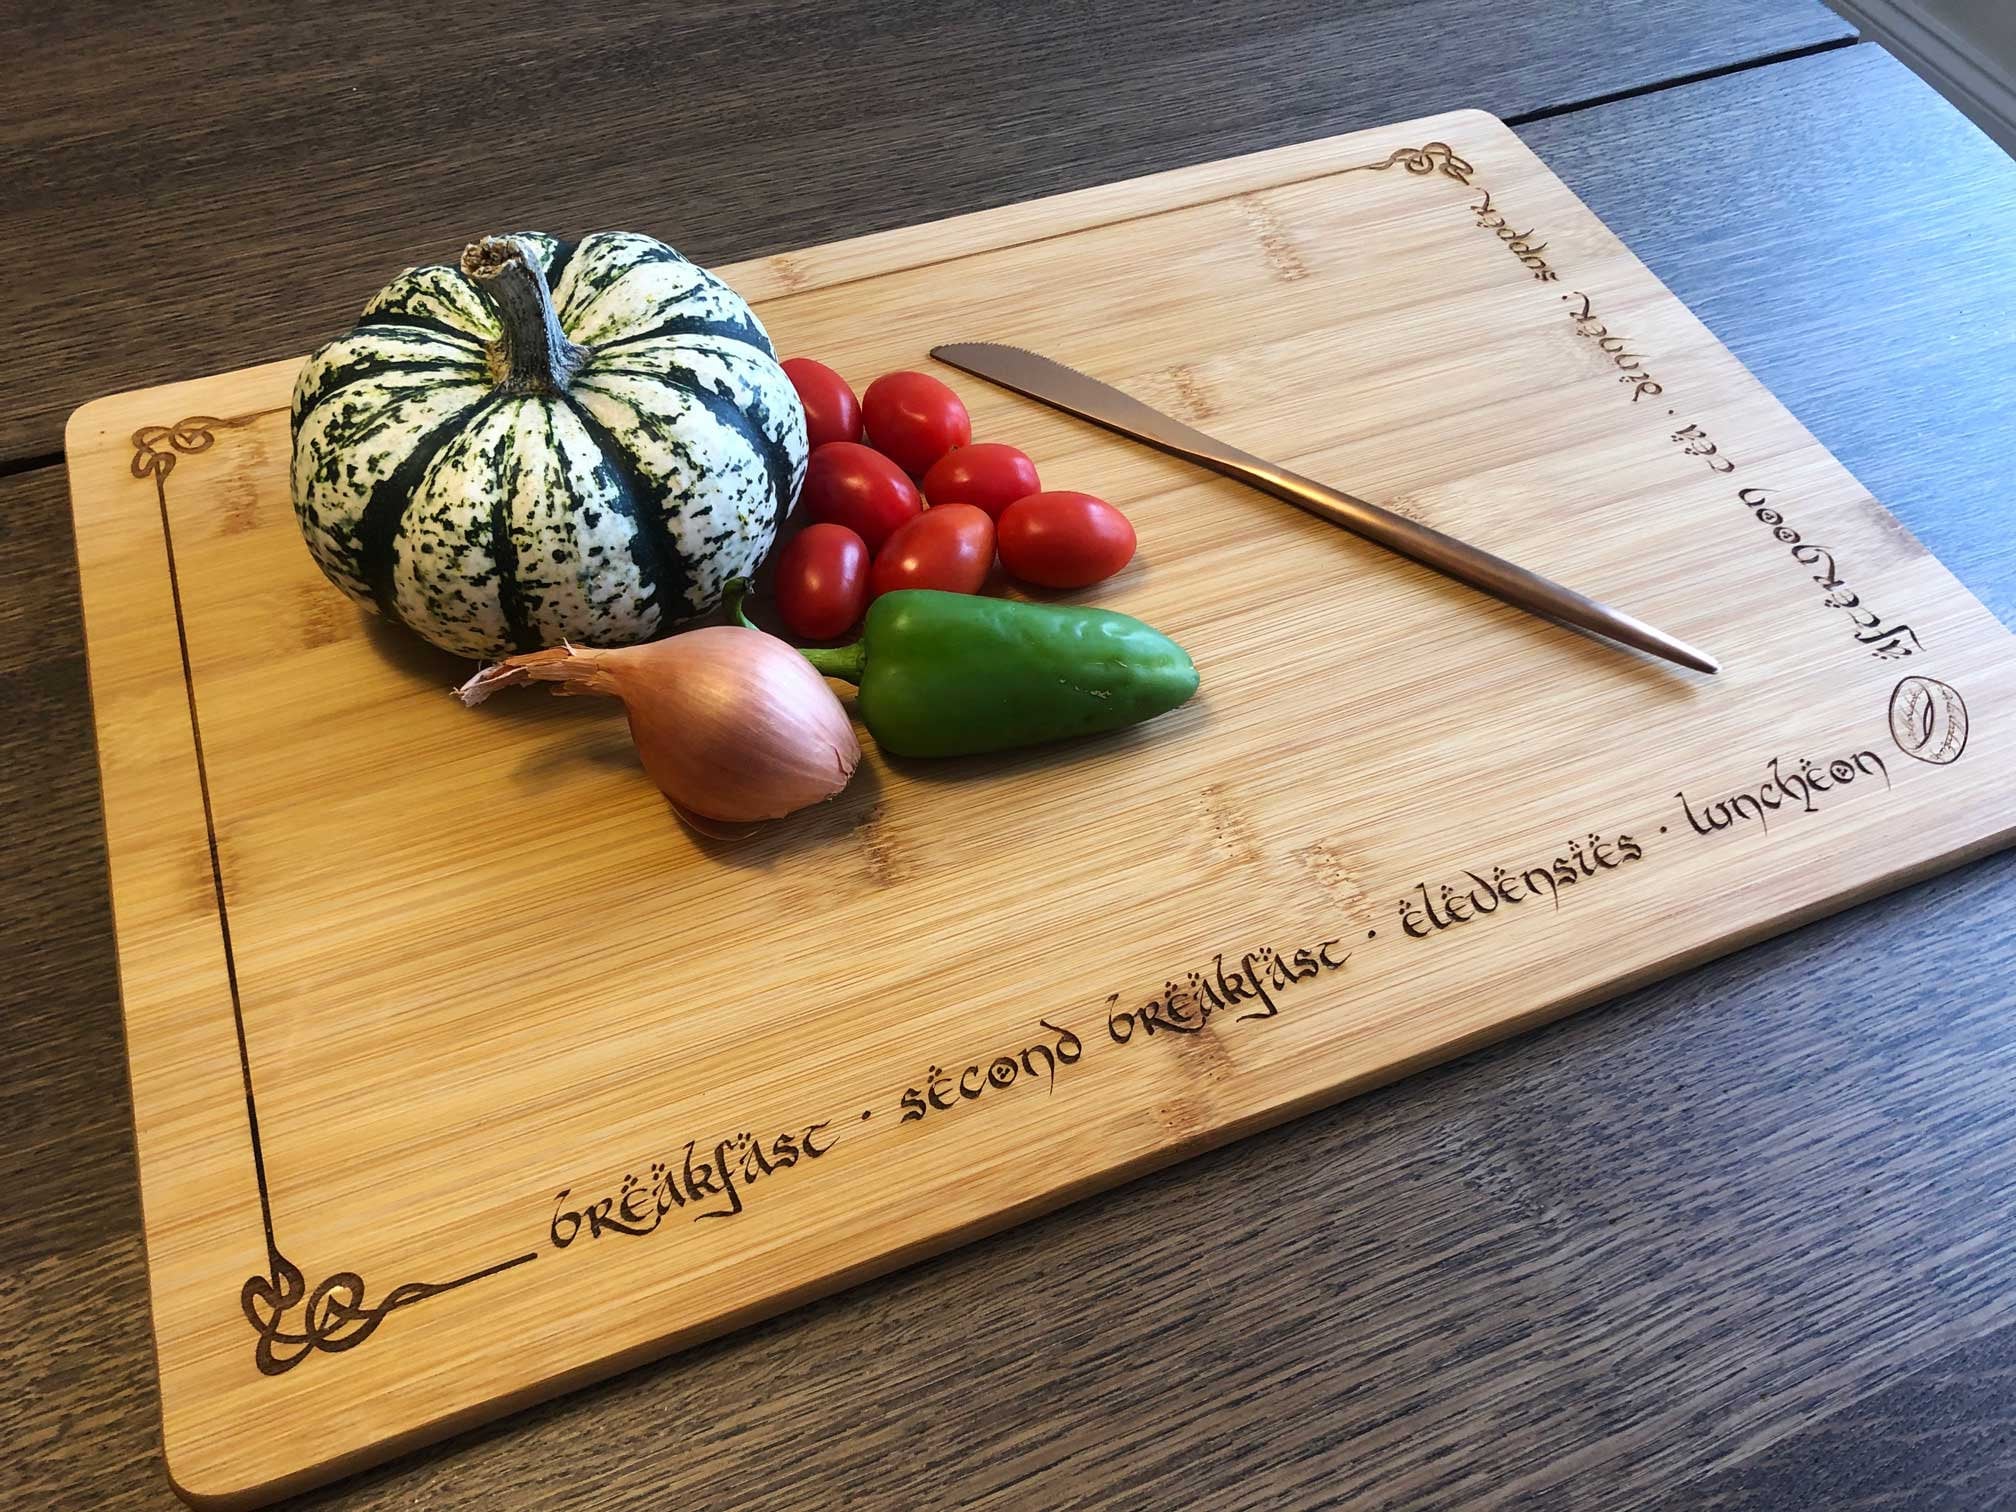 Lord of the Rings Engraved Wooden Chopping Board Potatoes Taters Cheese  Board Serving Board Birthday Christmas -  Sweden